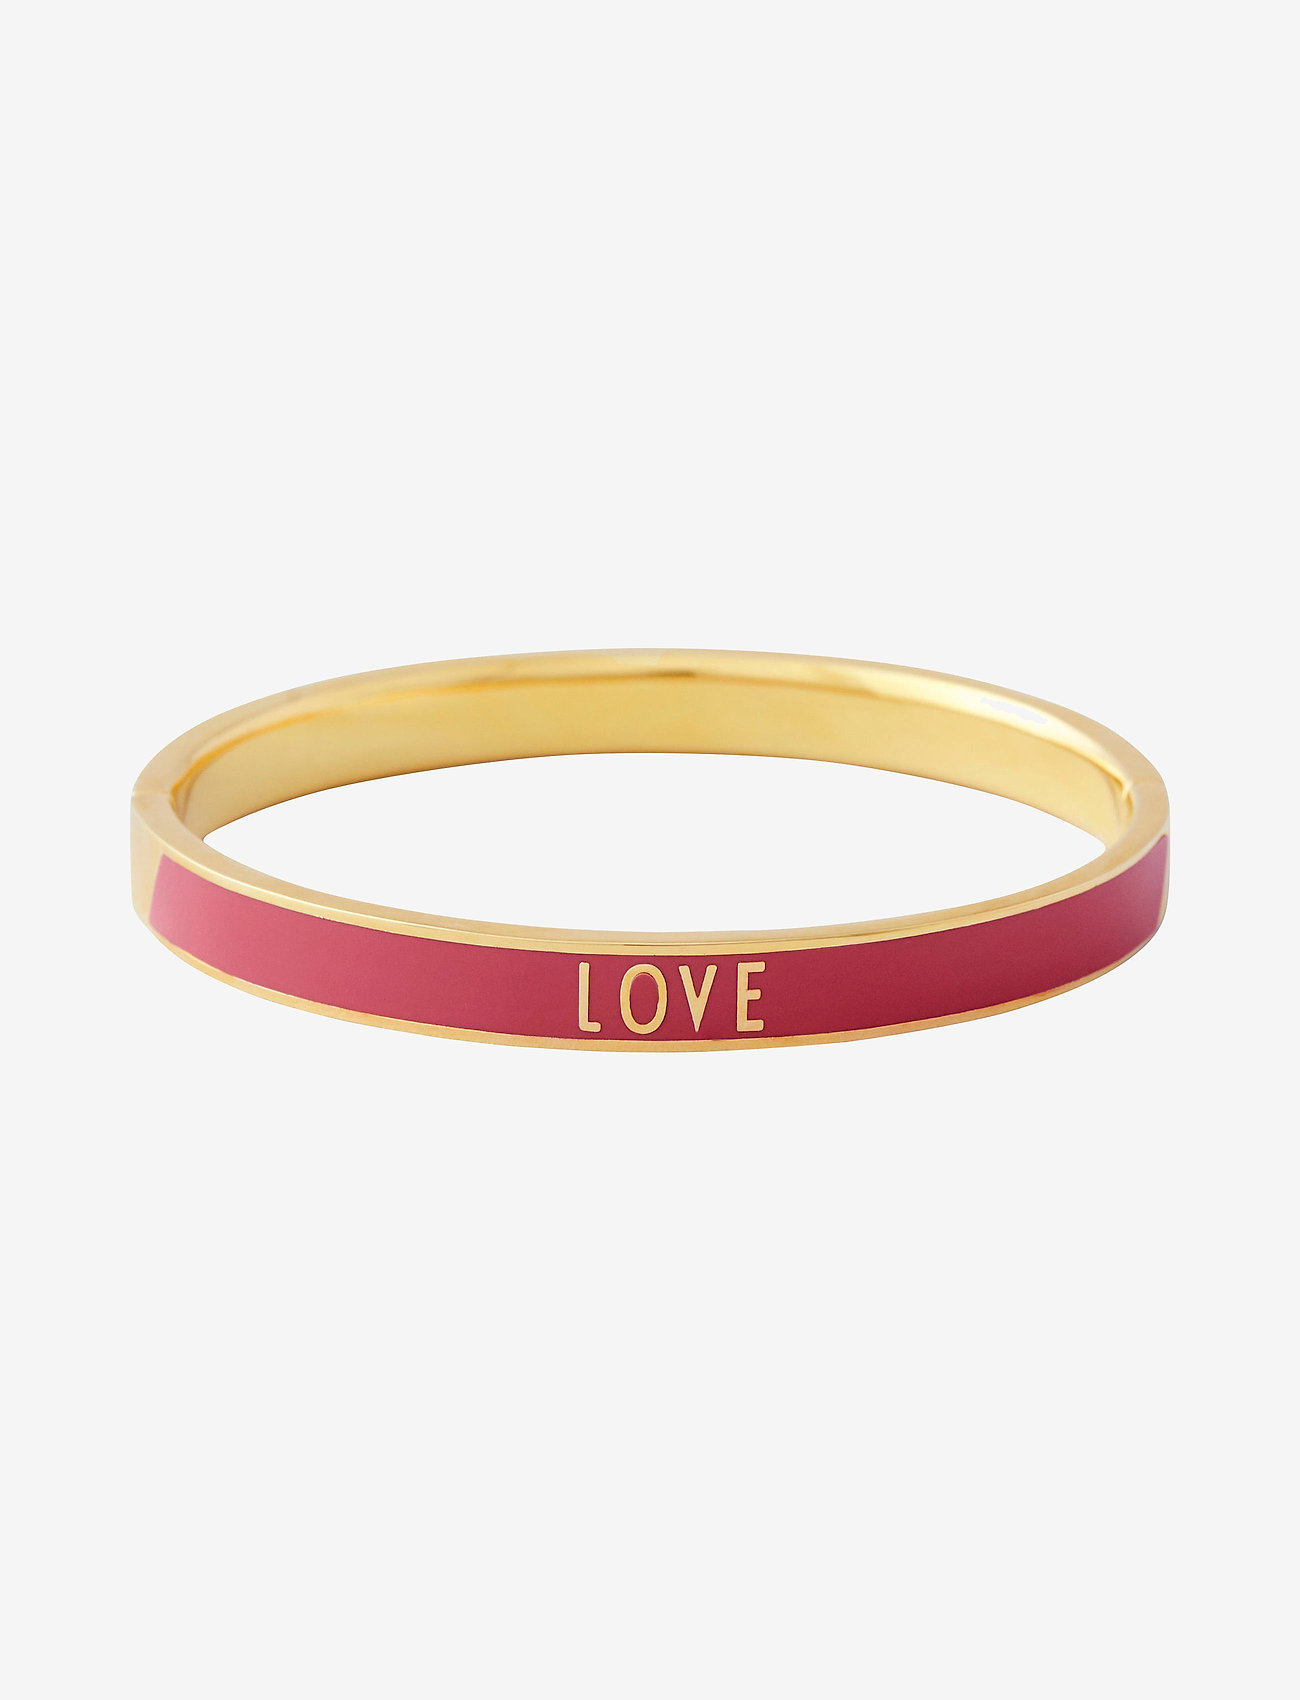 Design Letters - Word Candy Bangle - peoriided outlet-hindadega - arlove - 0